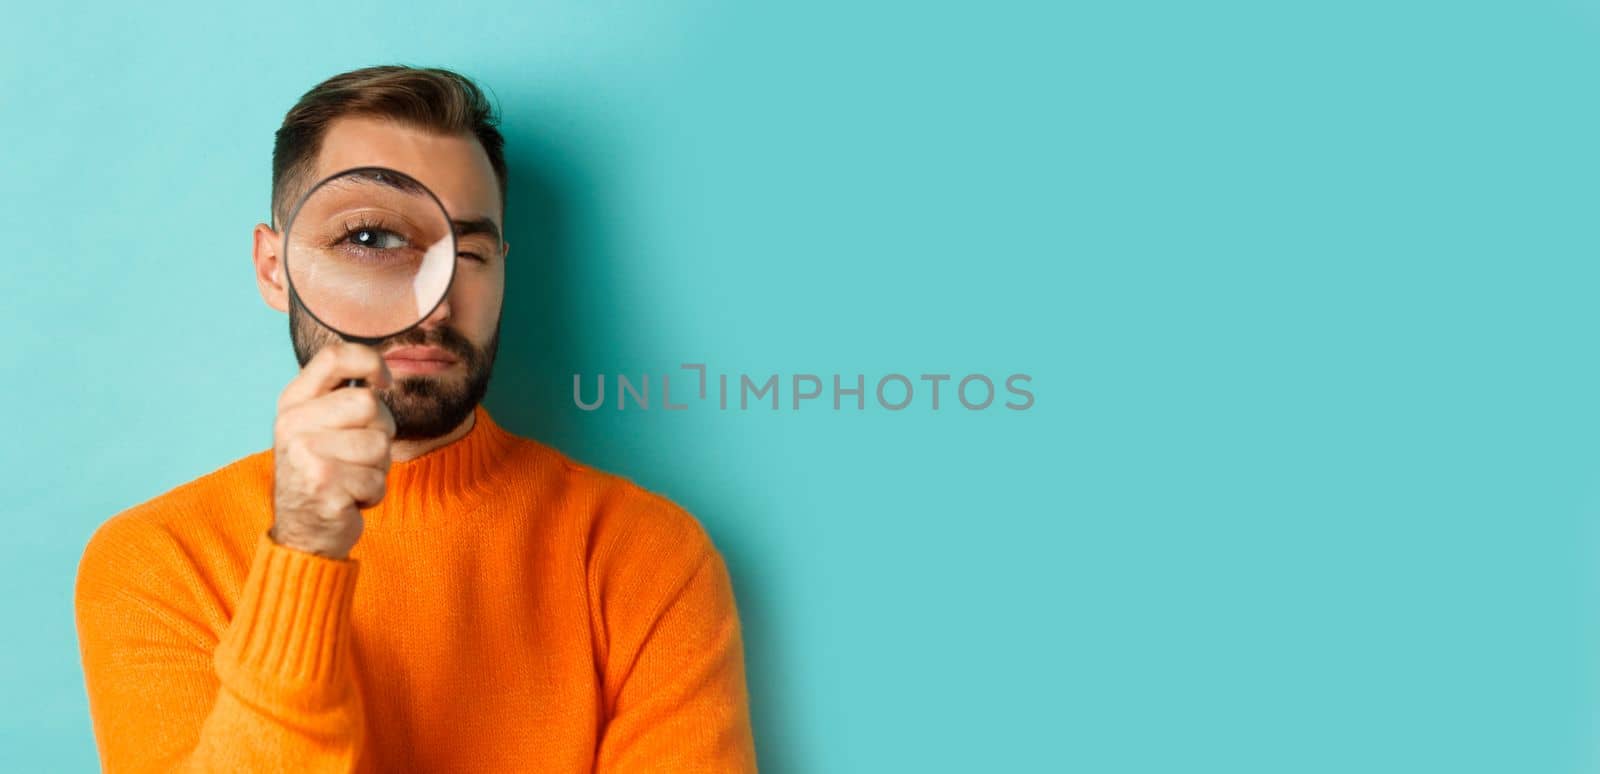 Funny man looking through magnifying glass, searching or investigating something, standing in orange sweater against turquoise background.